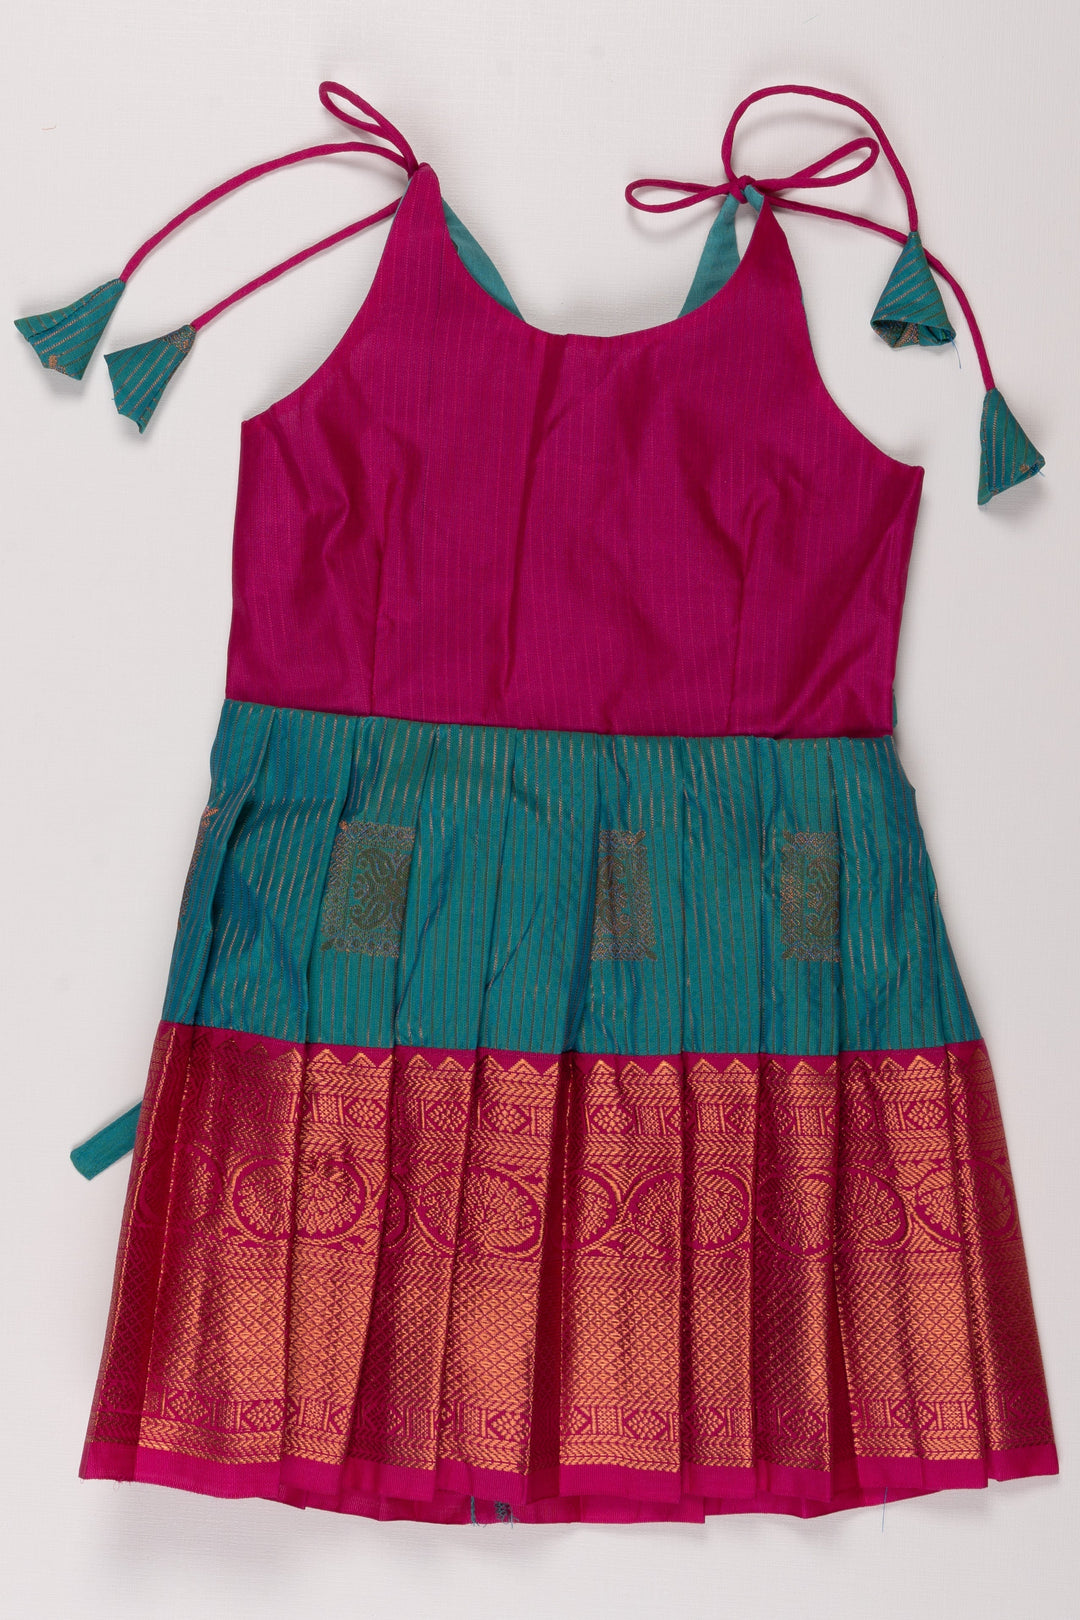 The Nesavu Tie Up Frock Teal Blue and Magenta Silk Frock with Zari Weave and Tie-Up Details Nesavu 16 (1Y) / Blue / Style 3 T324C-16 Teal and Magenta Silk Frock for Girls with Zari Detail | Festive and Playful | The Nesavu